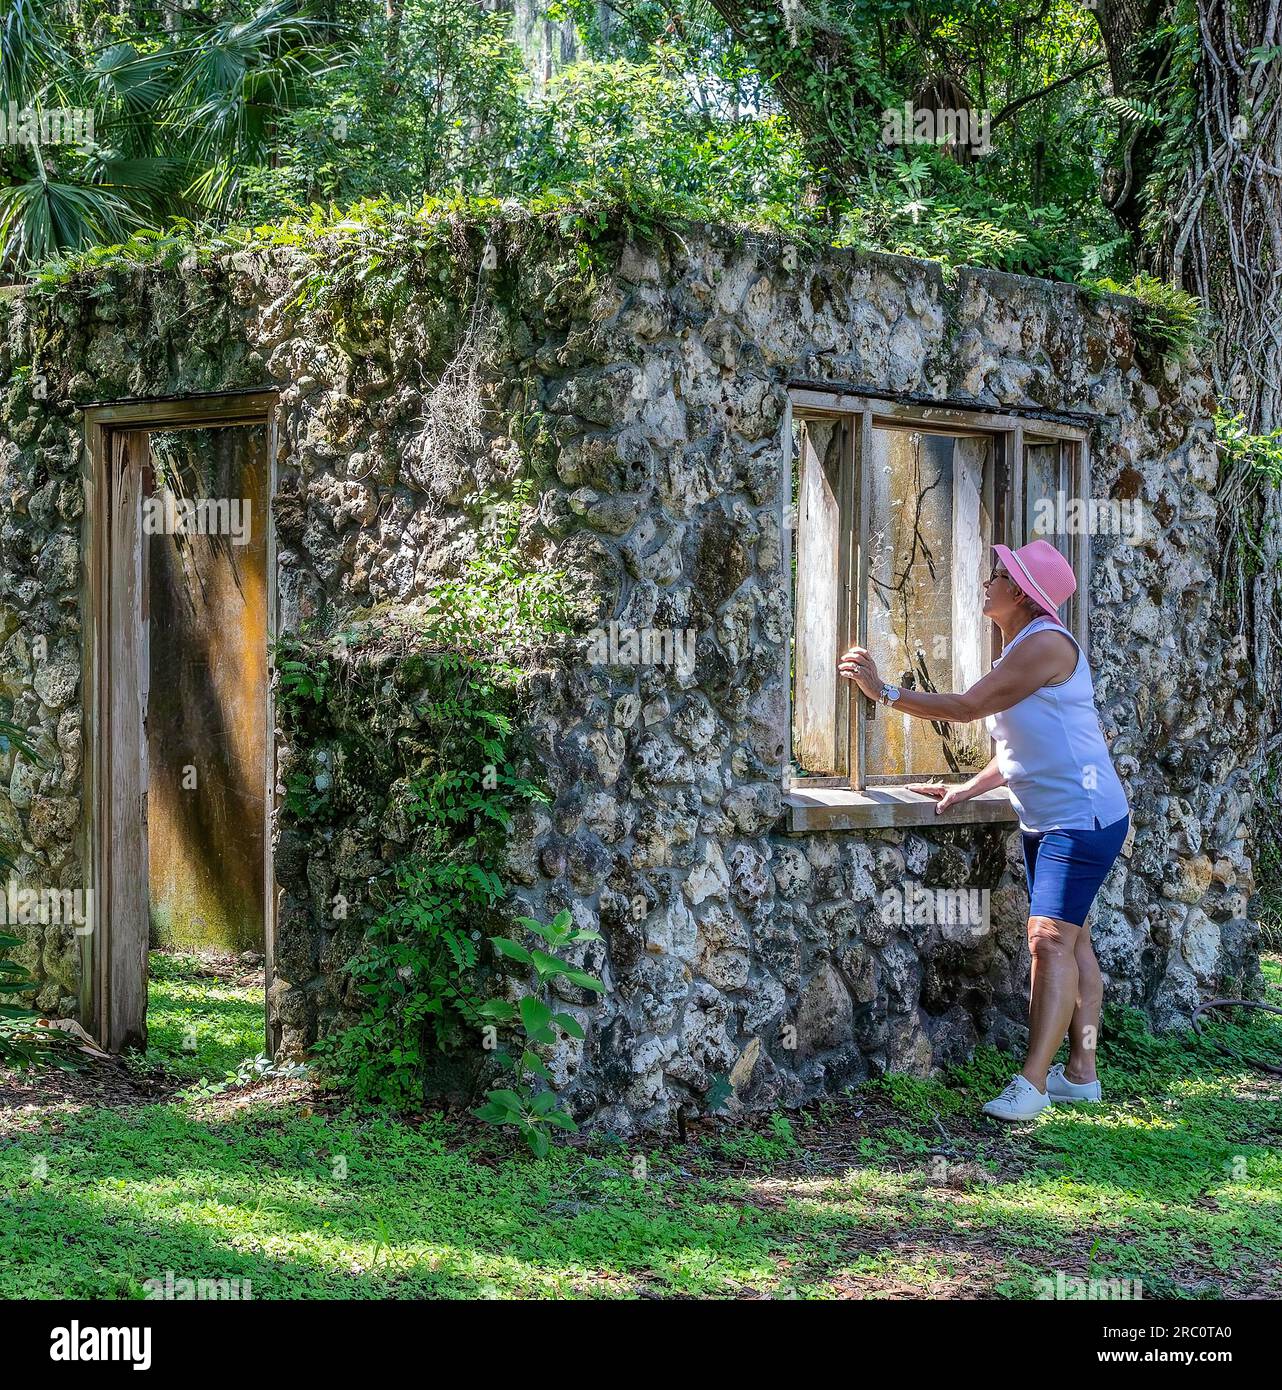 One of 1st roadside attractions in the state from 1940 as the 'Blossom Center of Florida' This is the original stone ticket gate being explored by a Stock Photo